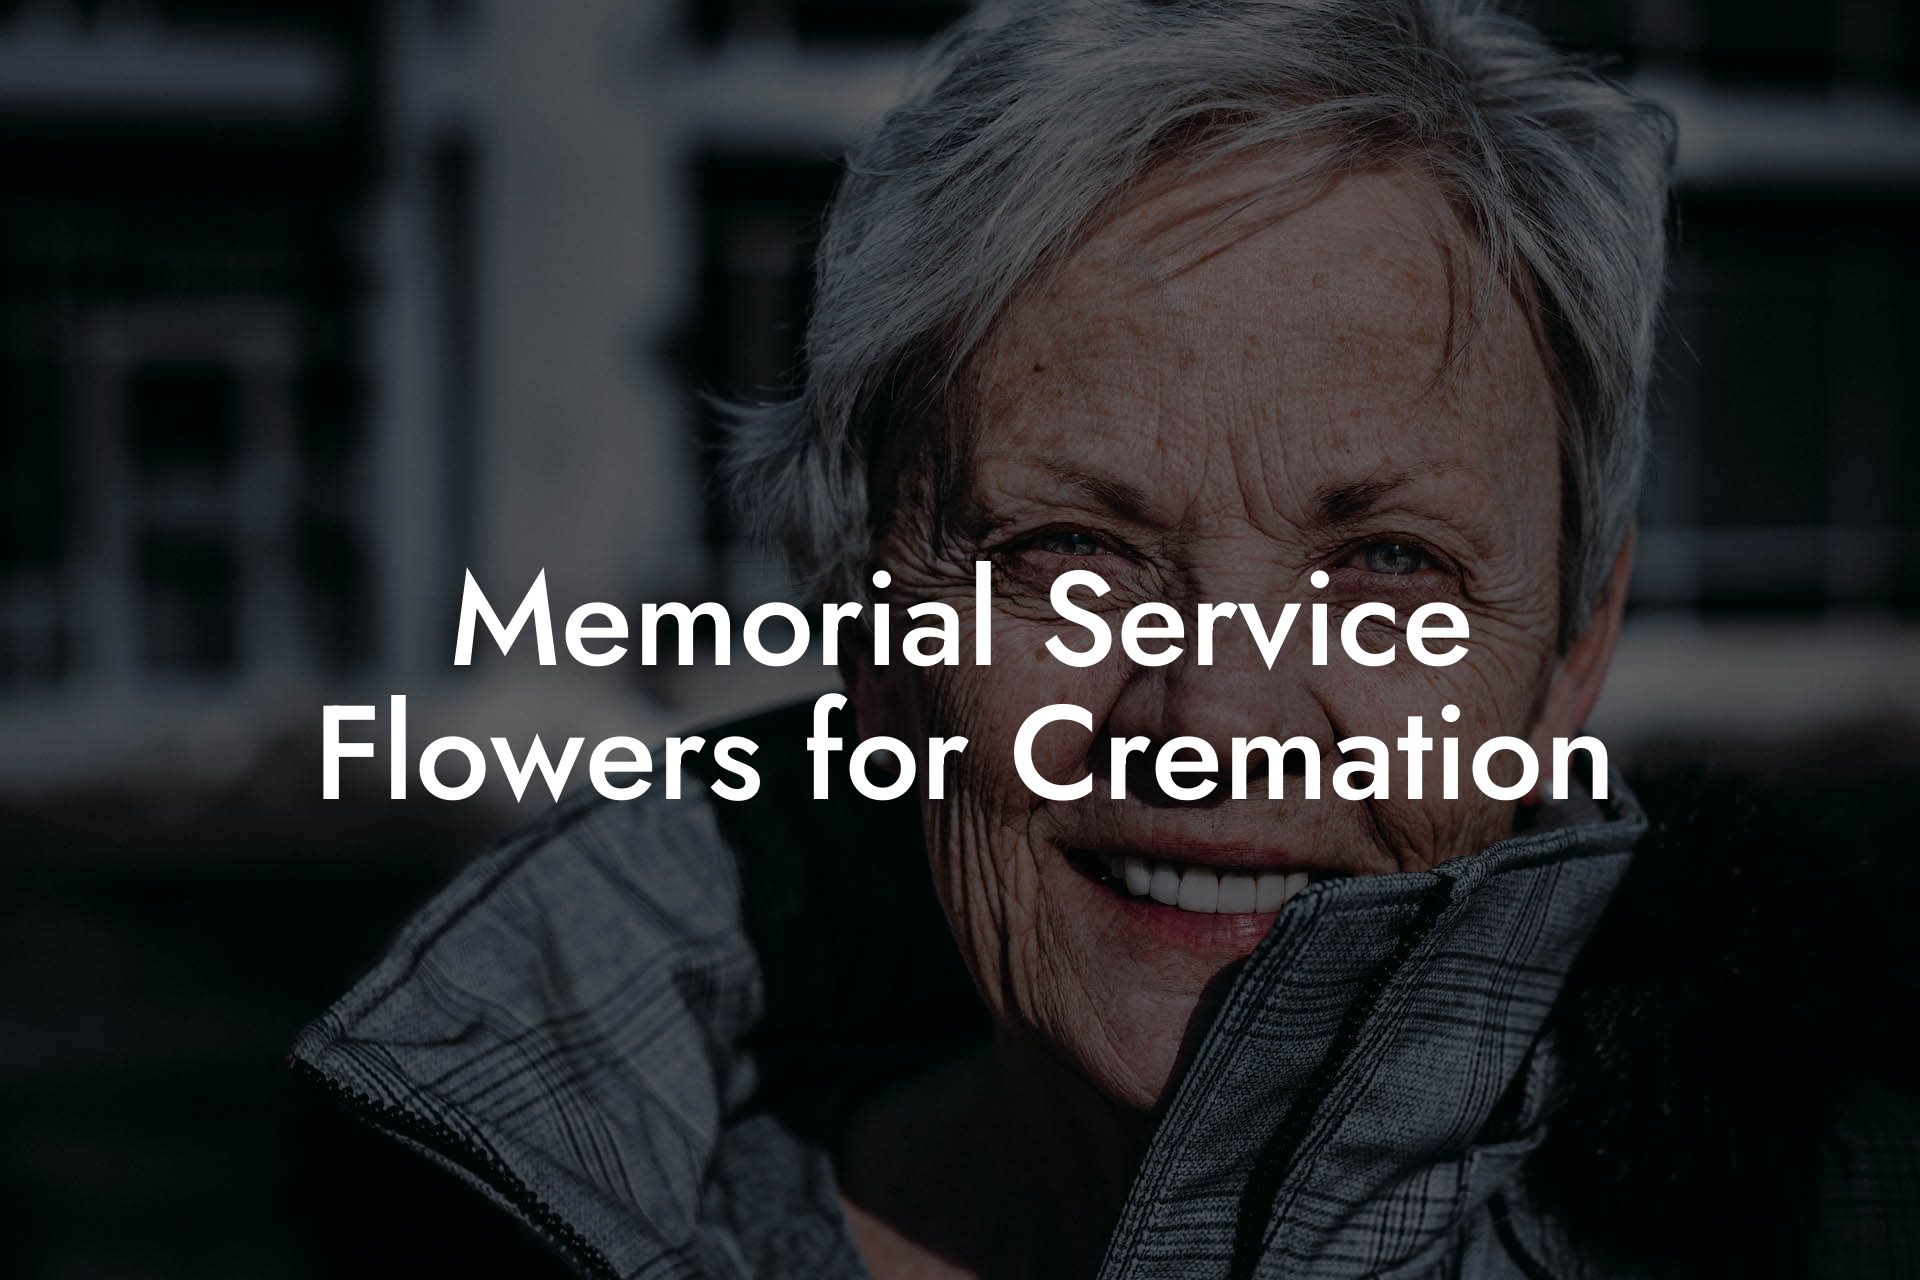 Memorial Service Flowers for Cremation